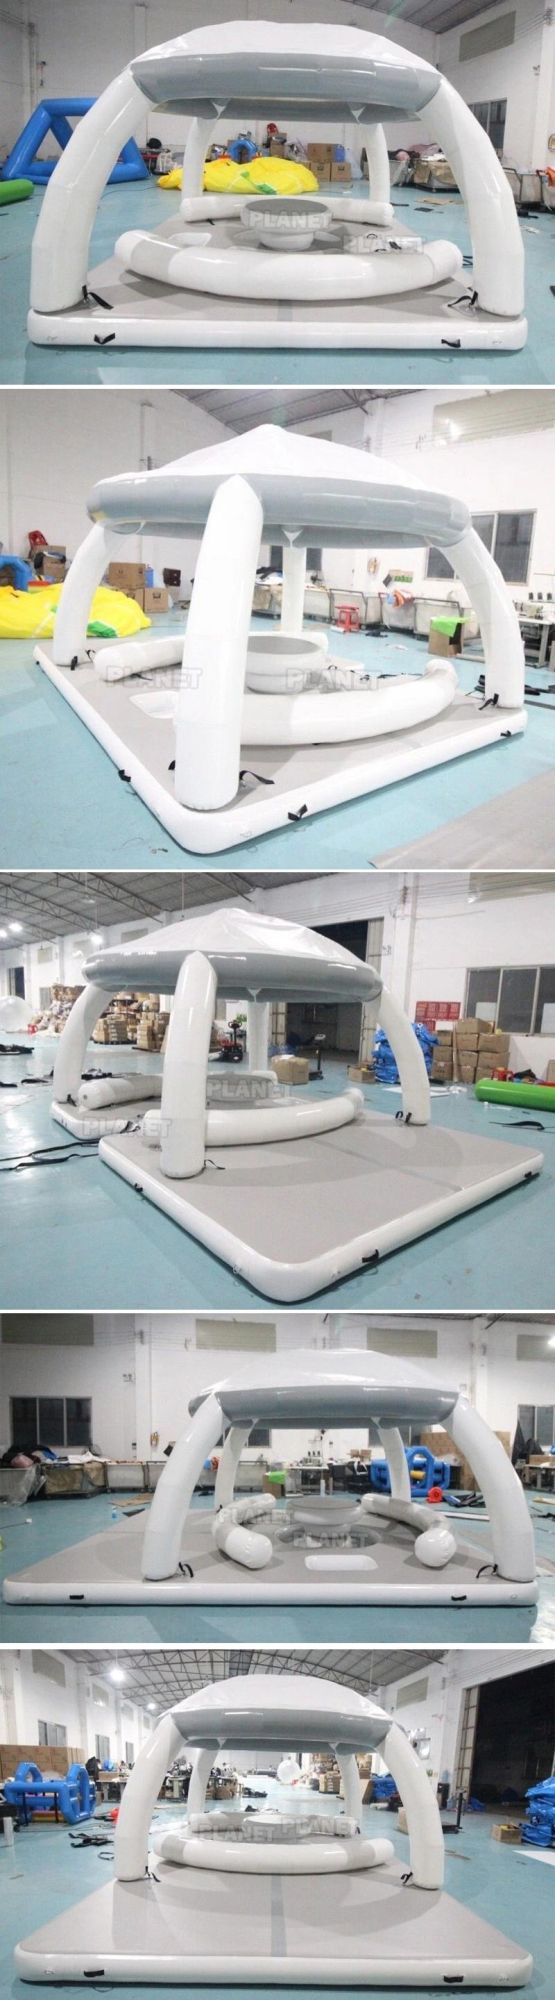 Aqua Banas Resort Island Raft Camping Inflatable Water Floating Lounger Inflatable Floating Dock with Tent